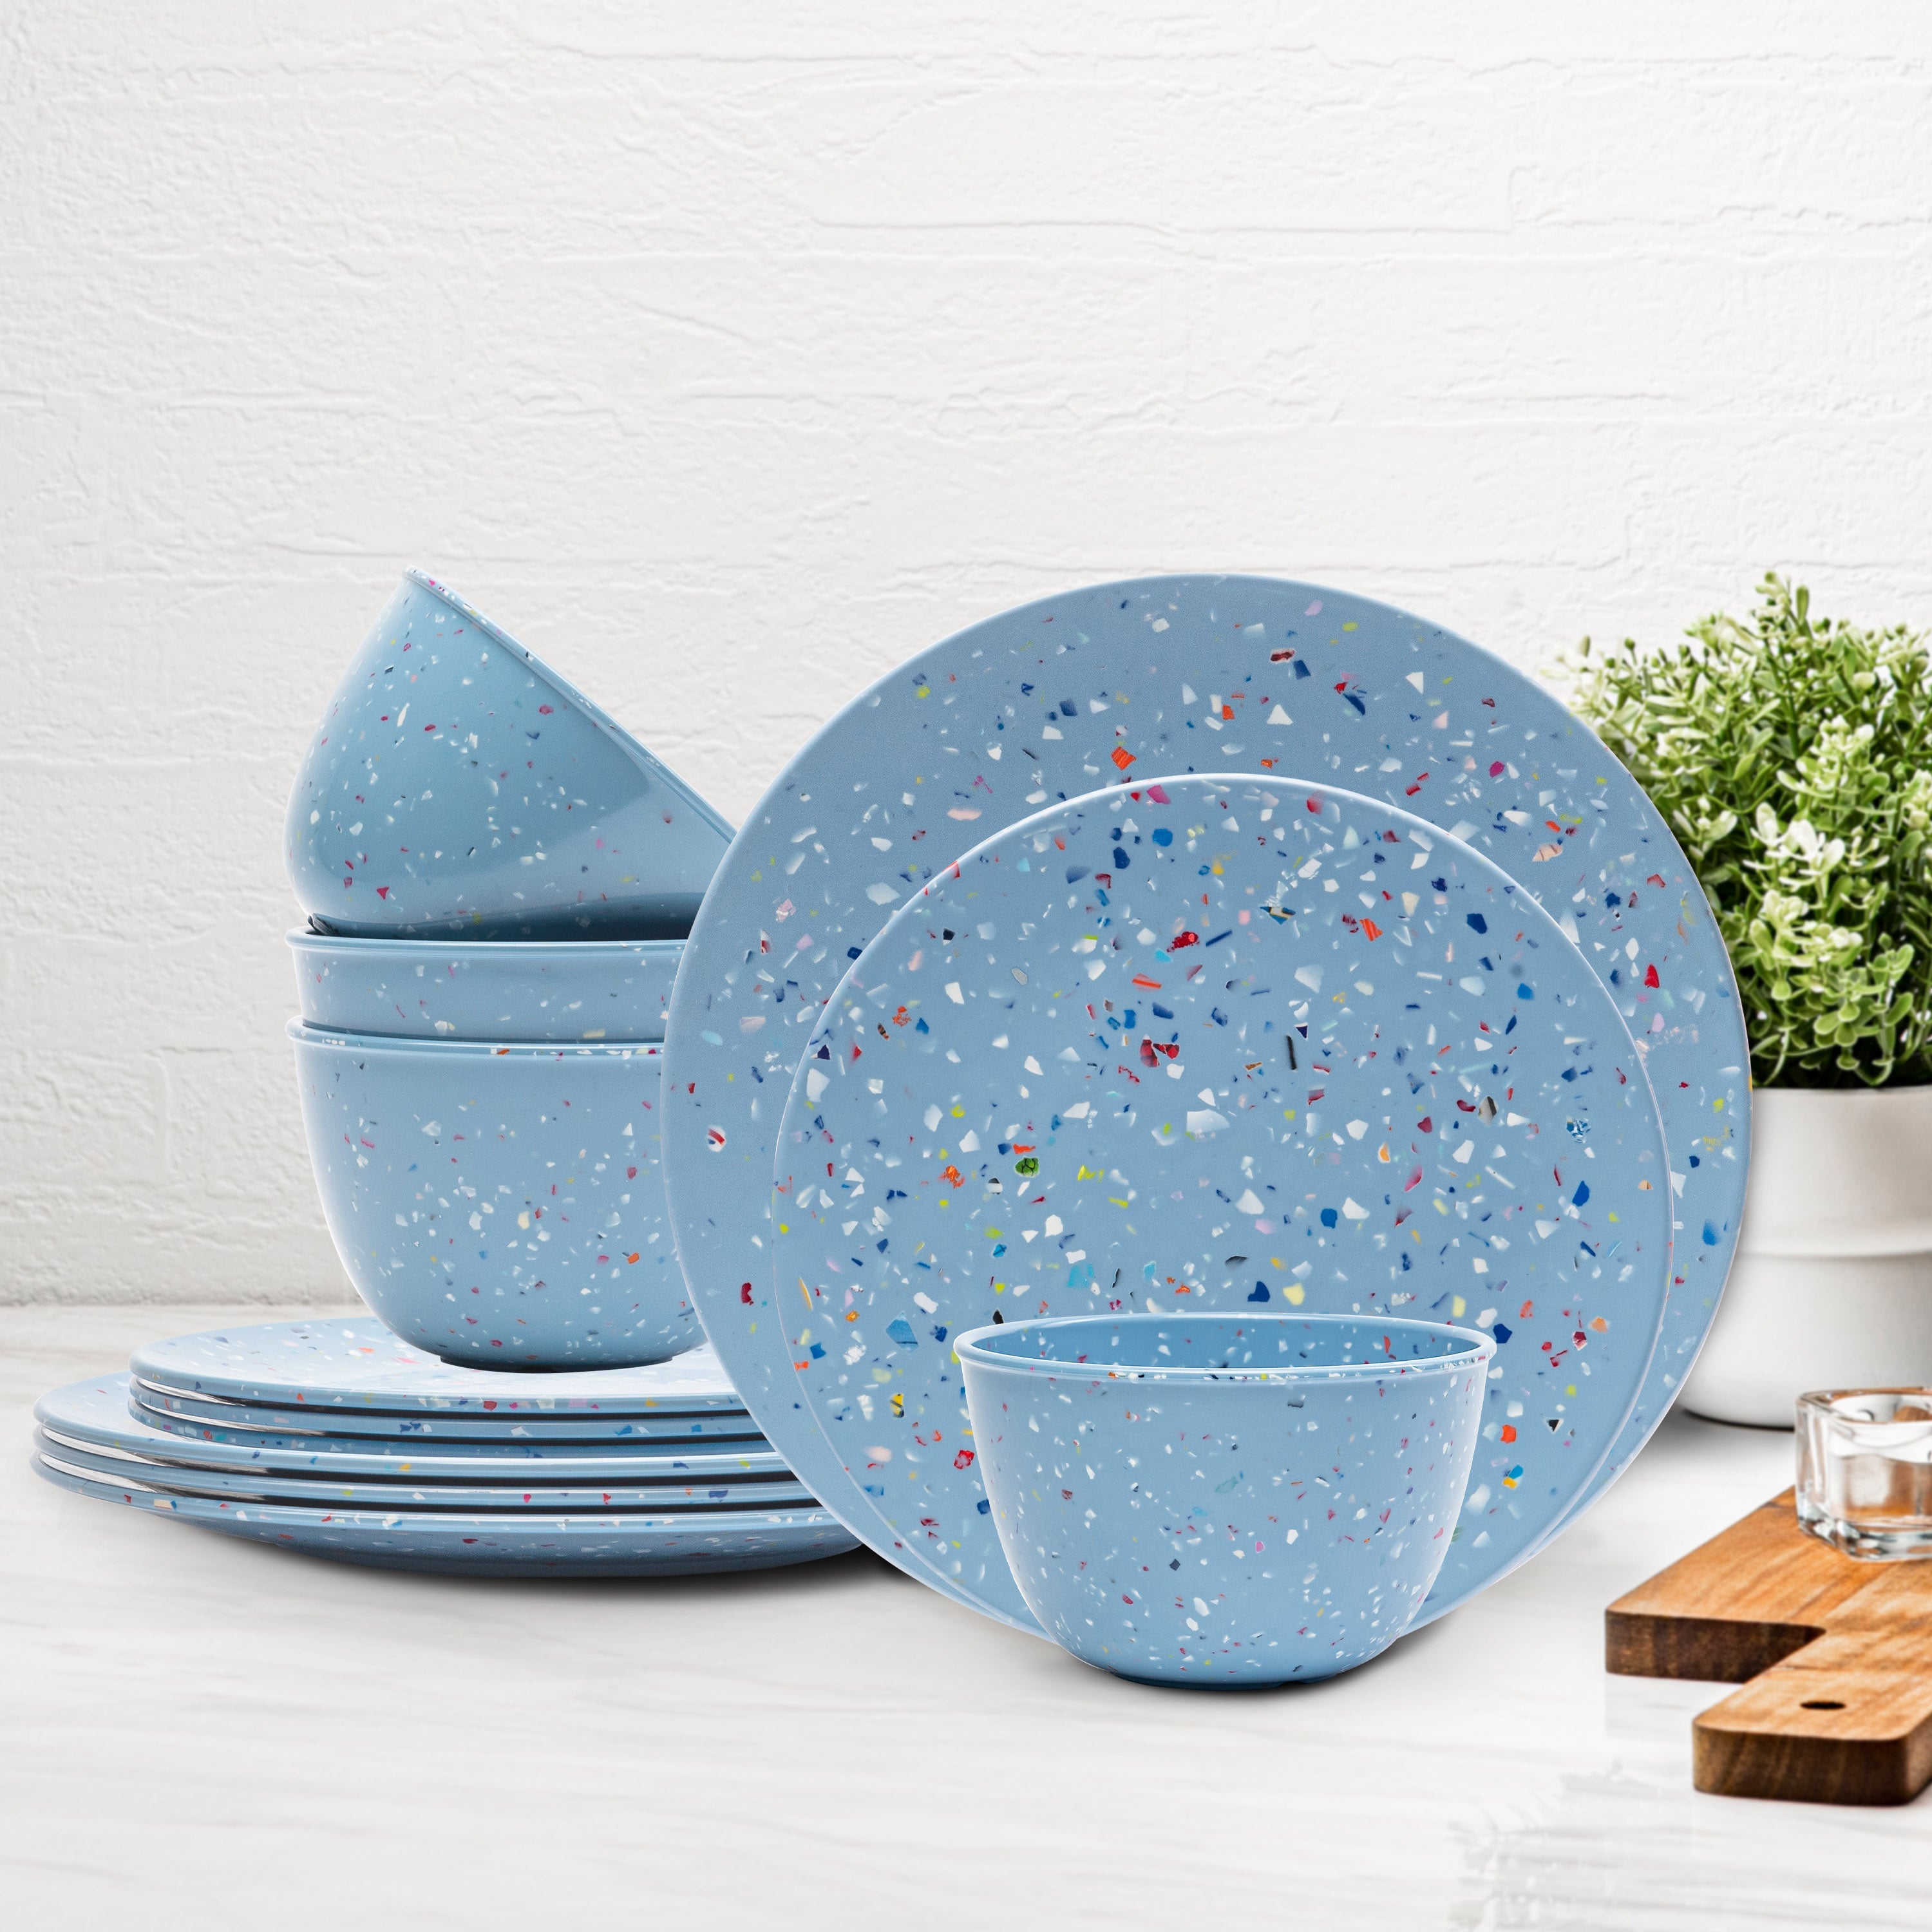 Confetti Melamine Dinnerware Set - Durable, Recycled Plates and Bowls, Blue